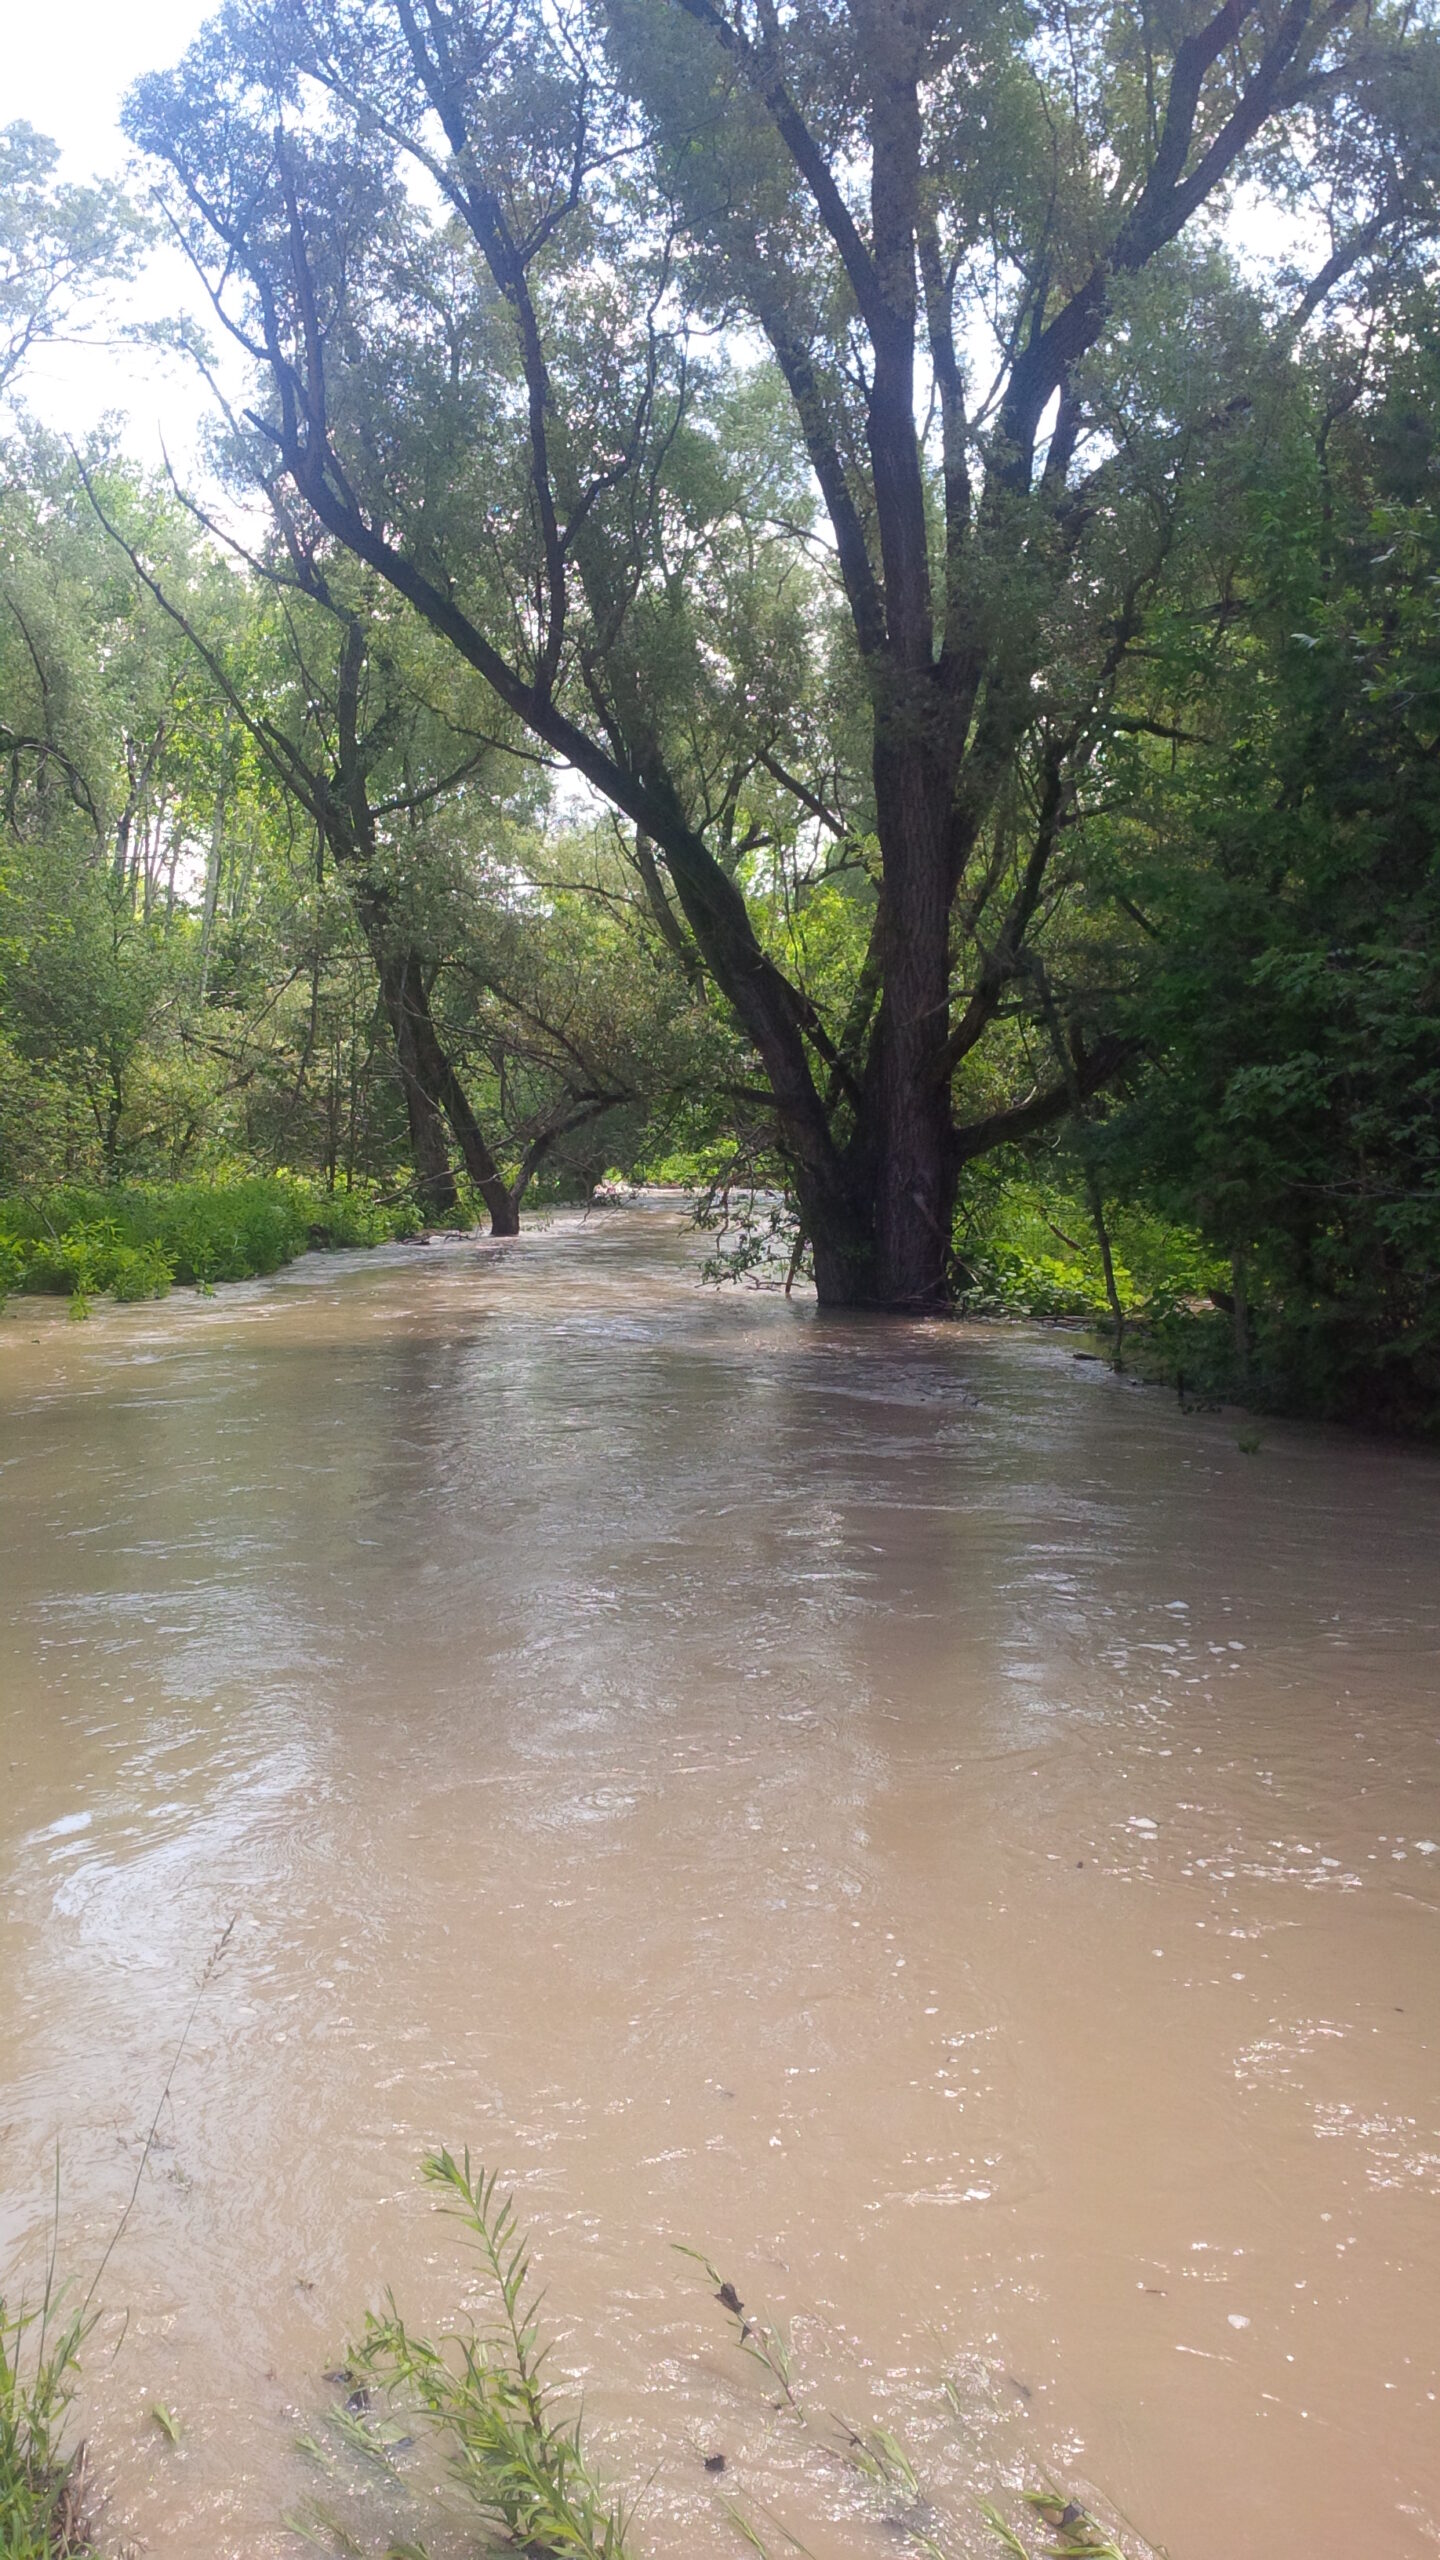 Muddy floodwater with trees and vegetation underwater